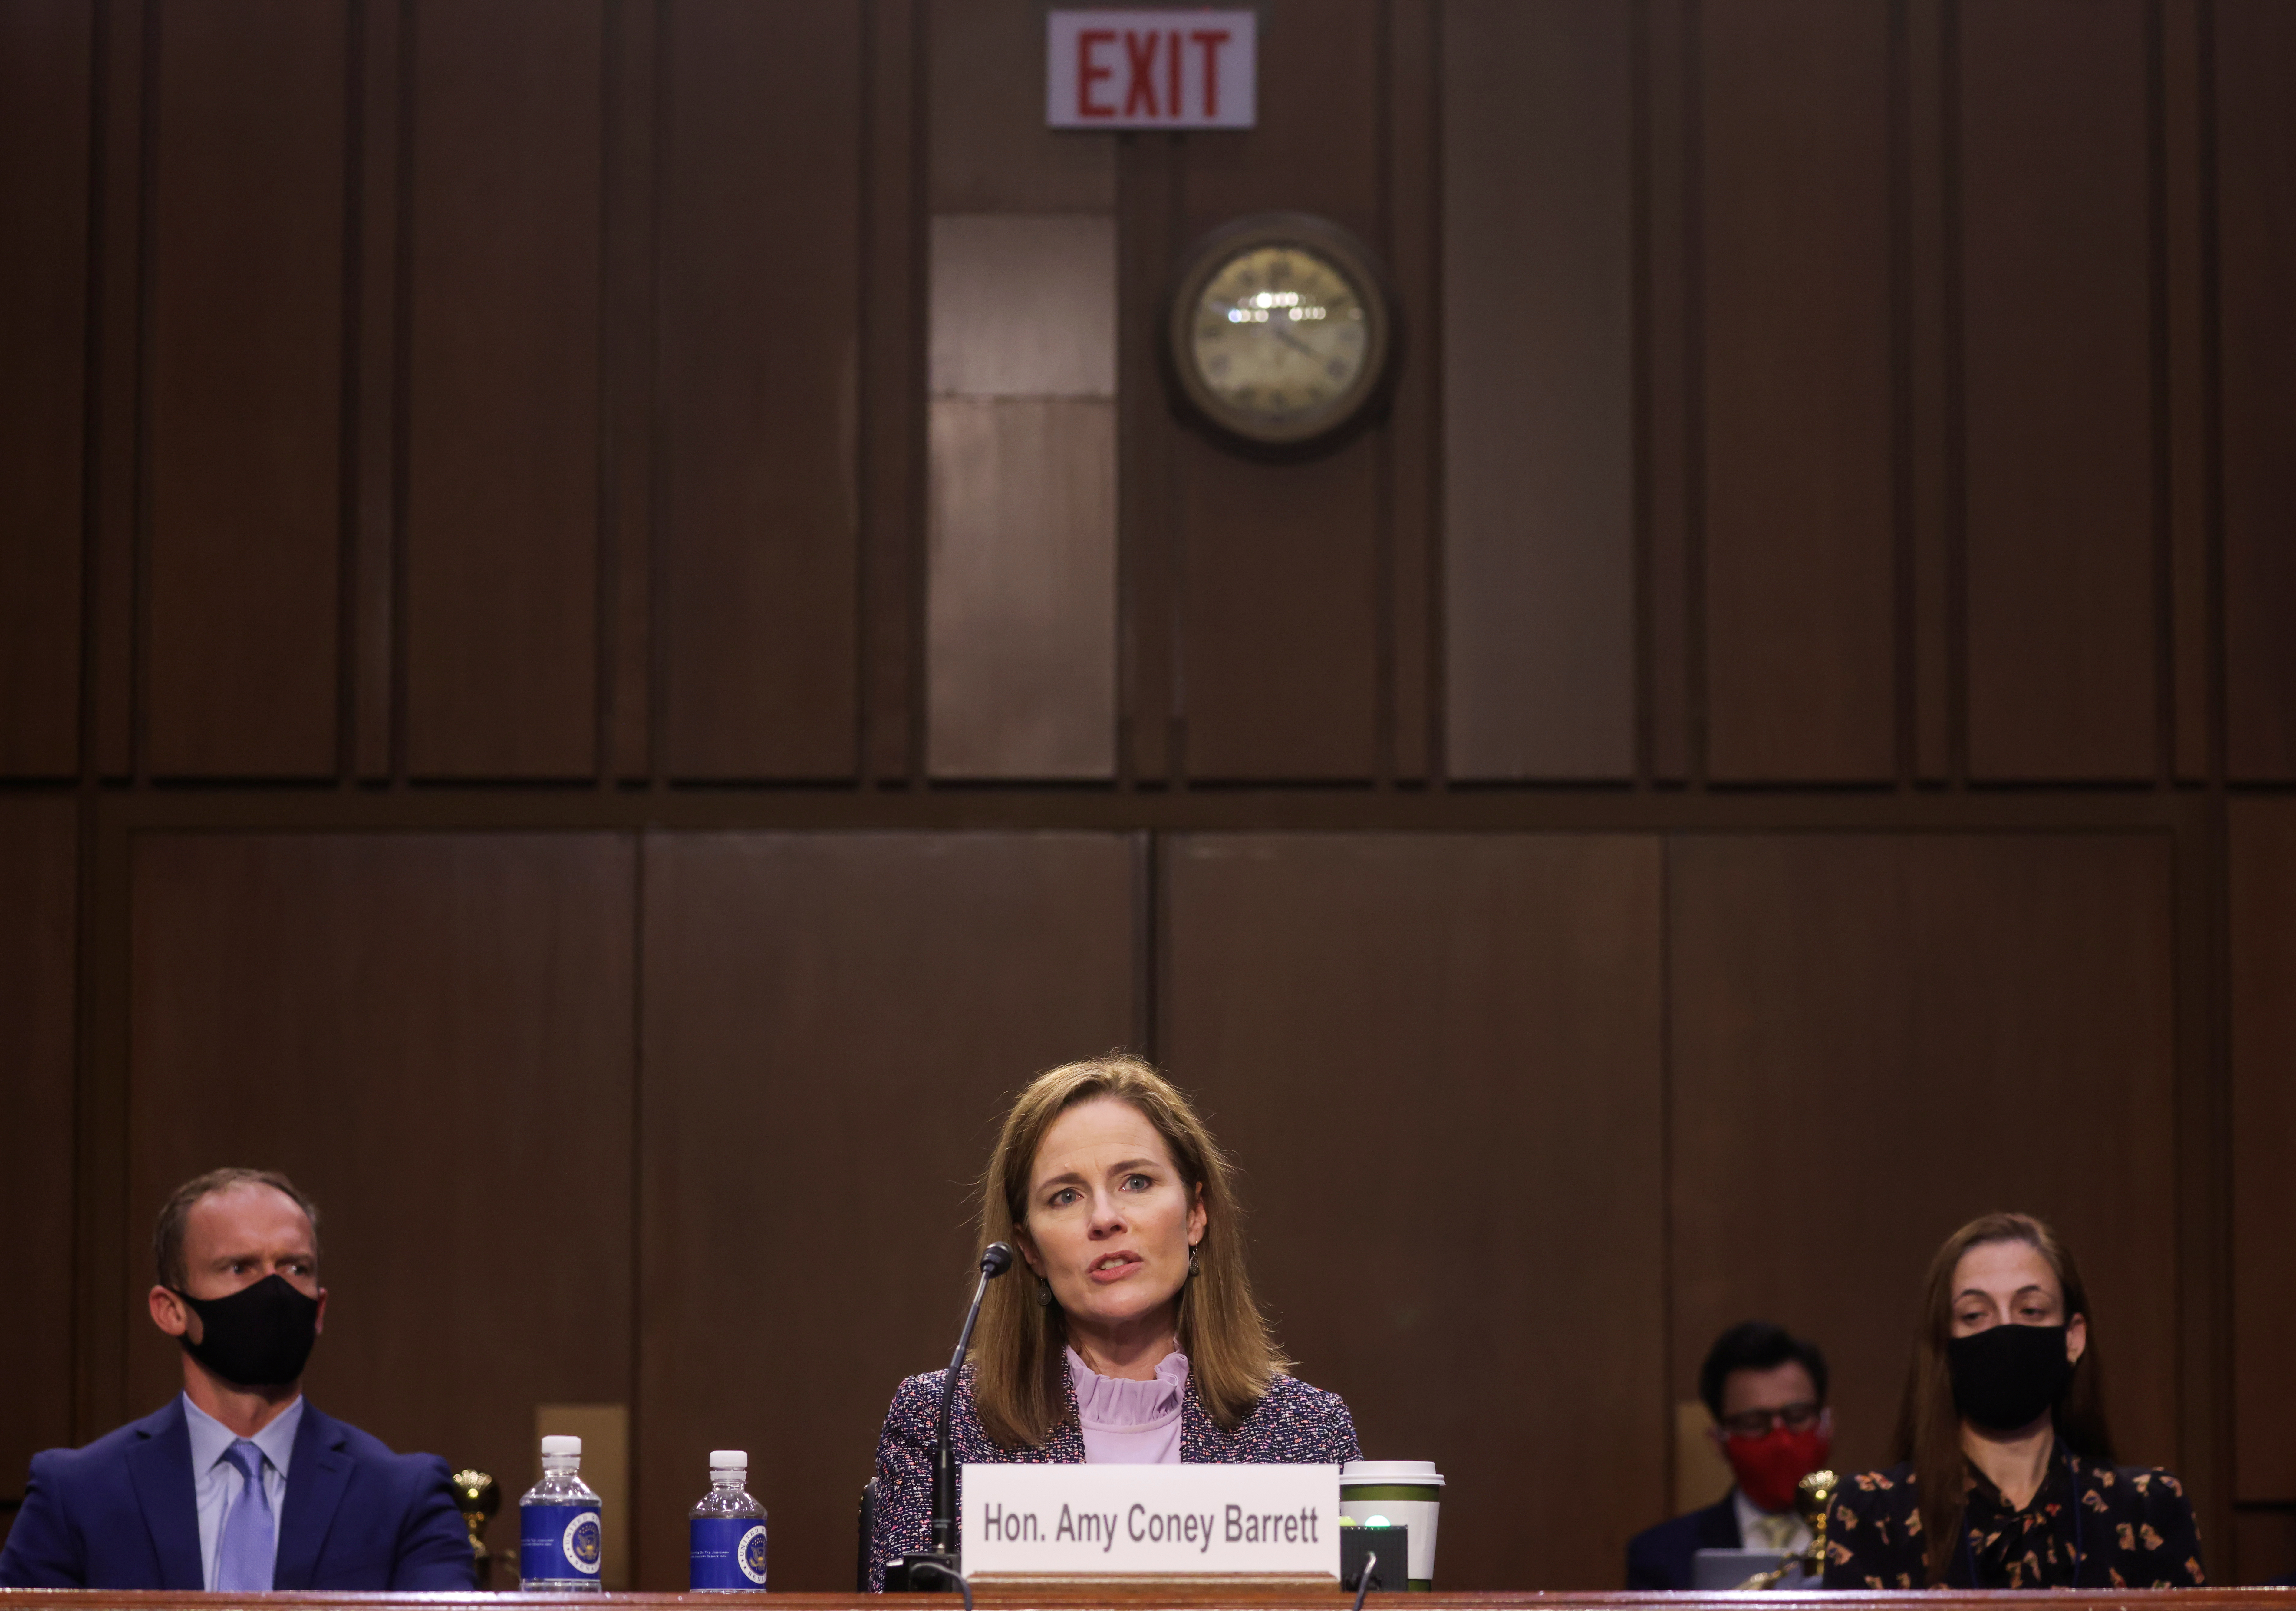 U.S. Supreme Court nominee Judge Amy Coney Barrett testifies on the third day of her U.S. Senate Judiciary Committee confirmation hearing as her husband, Jesse, listens on Capitol Hill in Washington, U.S., October 14, 2020. REUTERS/Jonathan Ernst/Pool